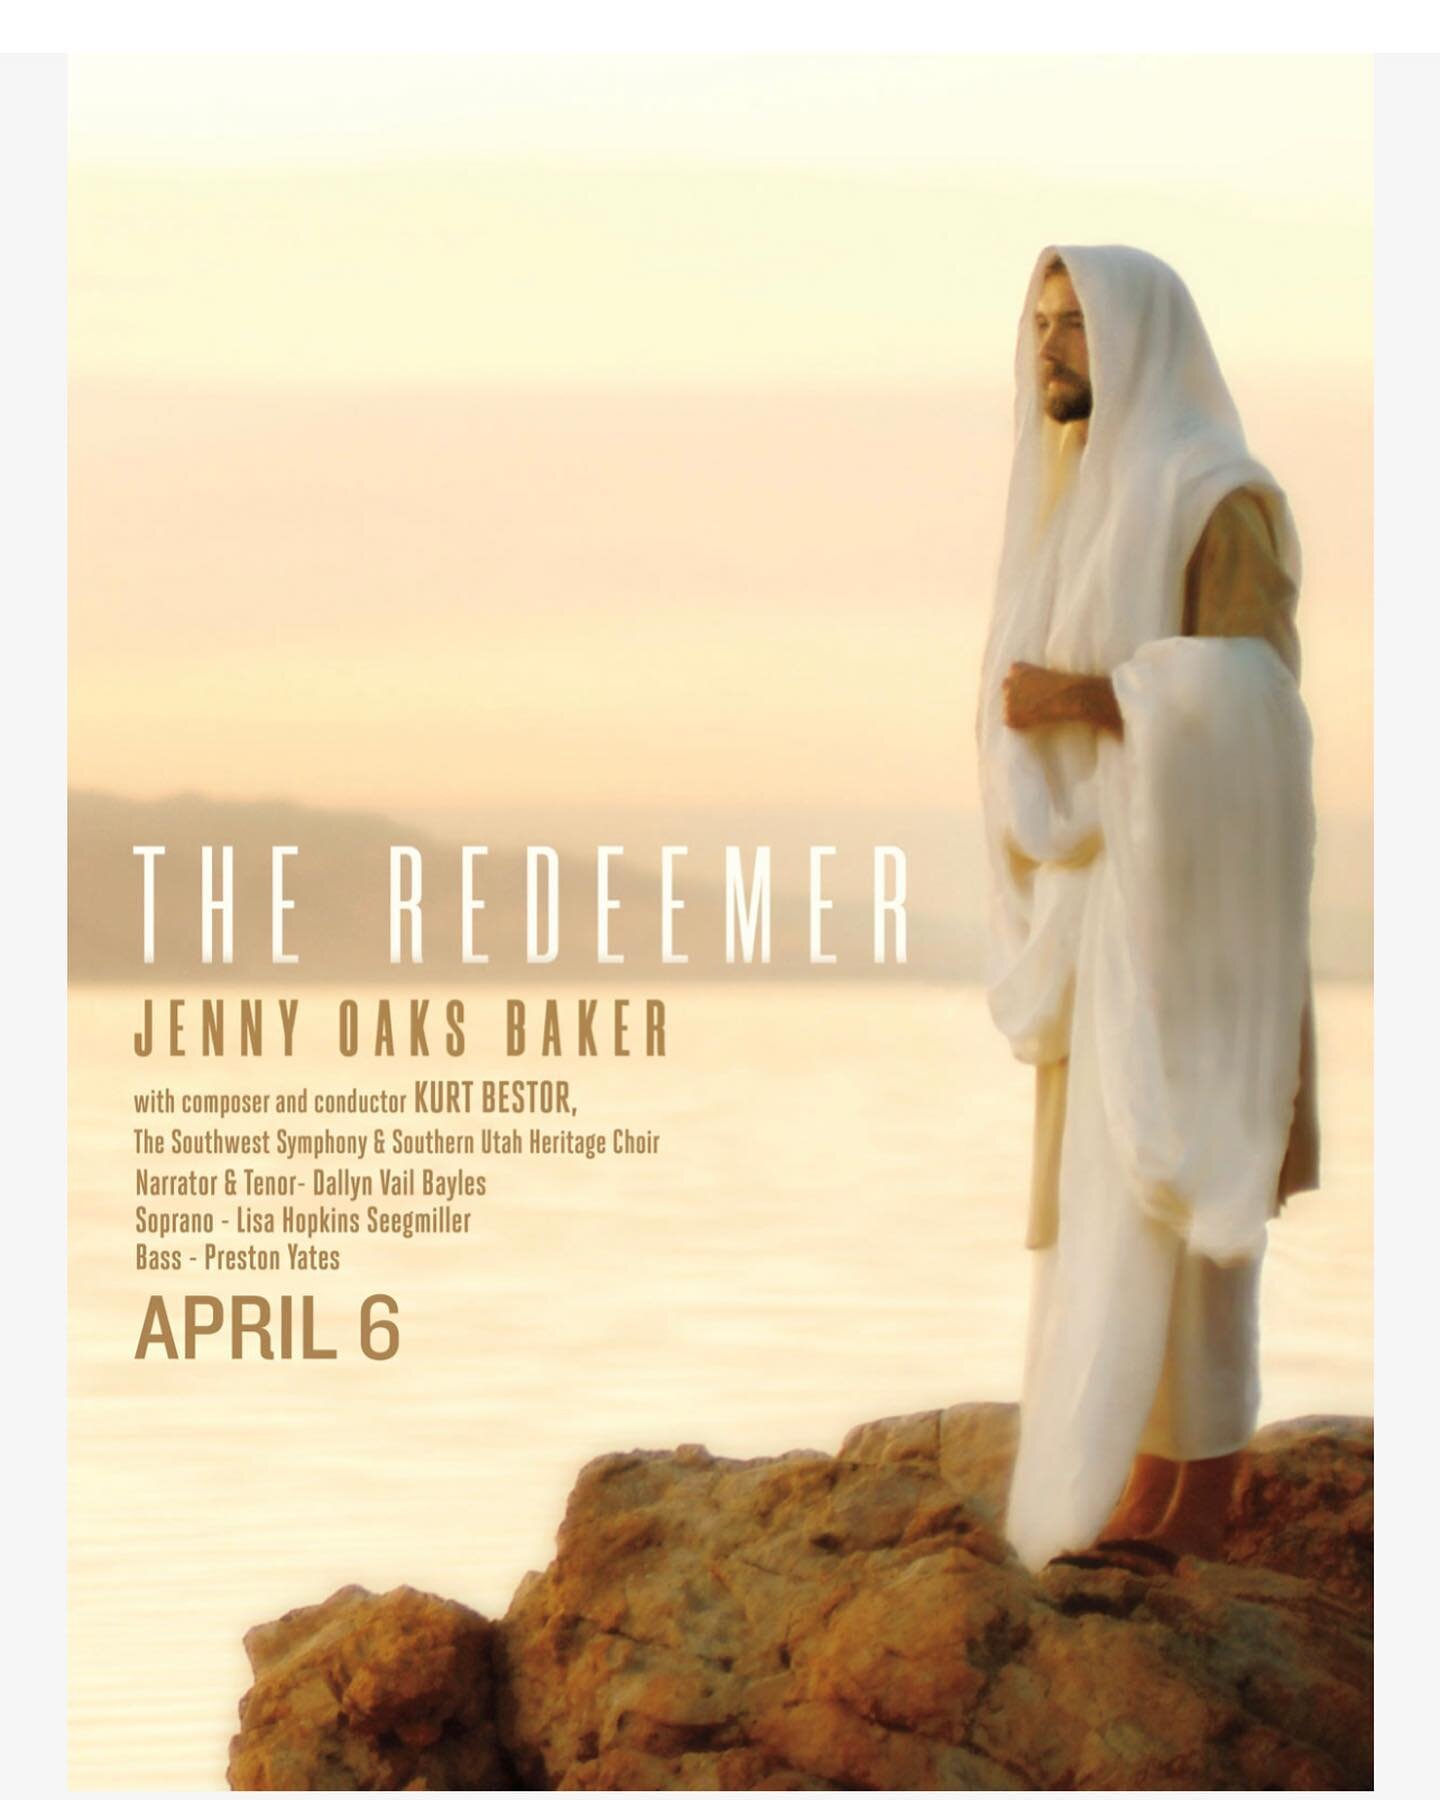 So excited to perform The Redeemer @tuacahn.amp on April 6th! Come celebrate EASTER by experiencing this spiritually impactful and emotionally stirring WORLD PREMIER EXPANDED SHOW which includes 7 new songs by composer/conductor @kbestor , with narra